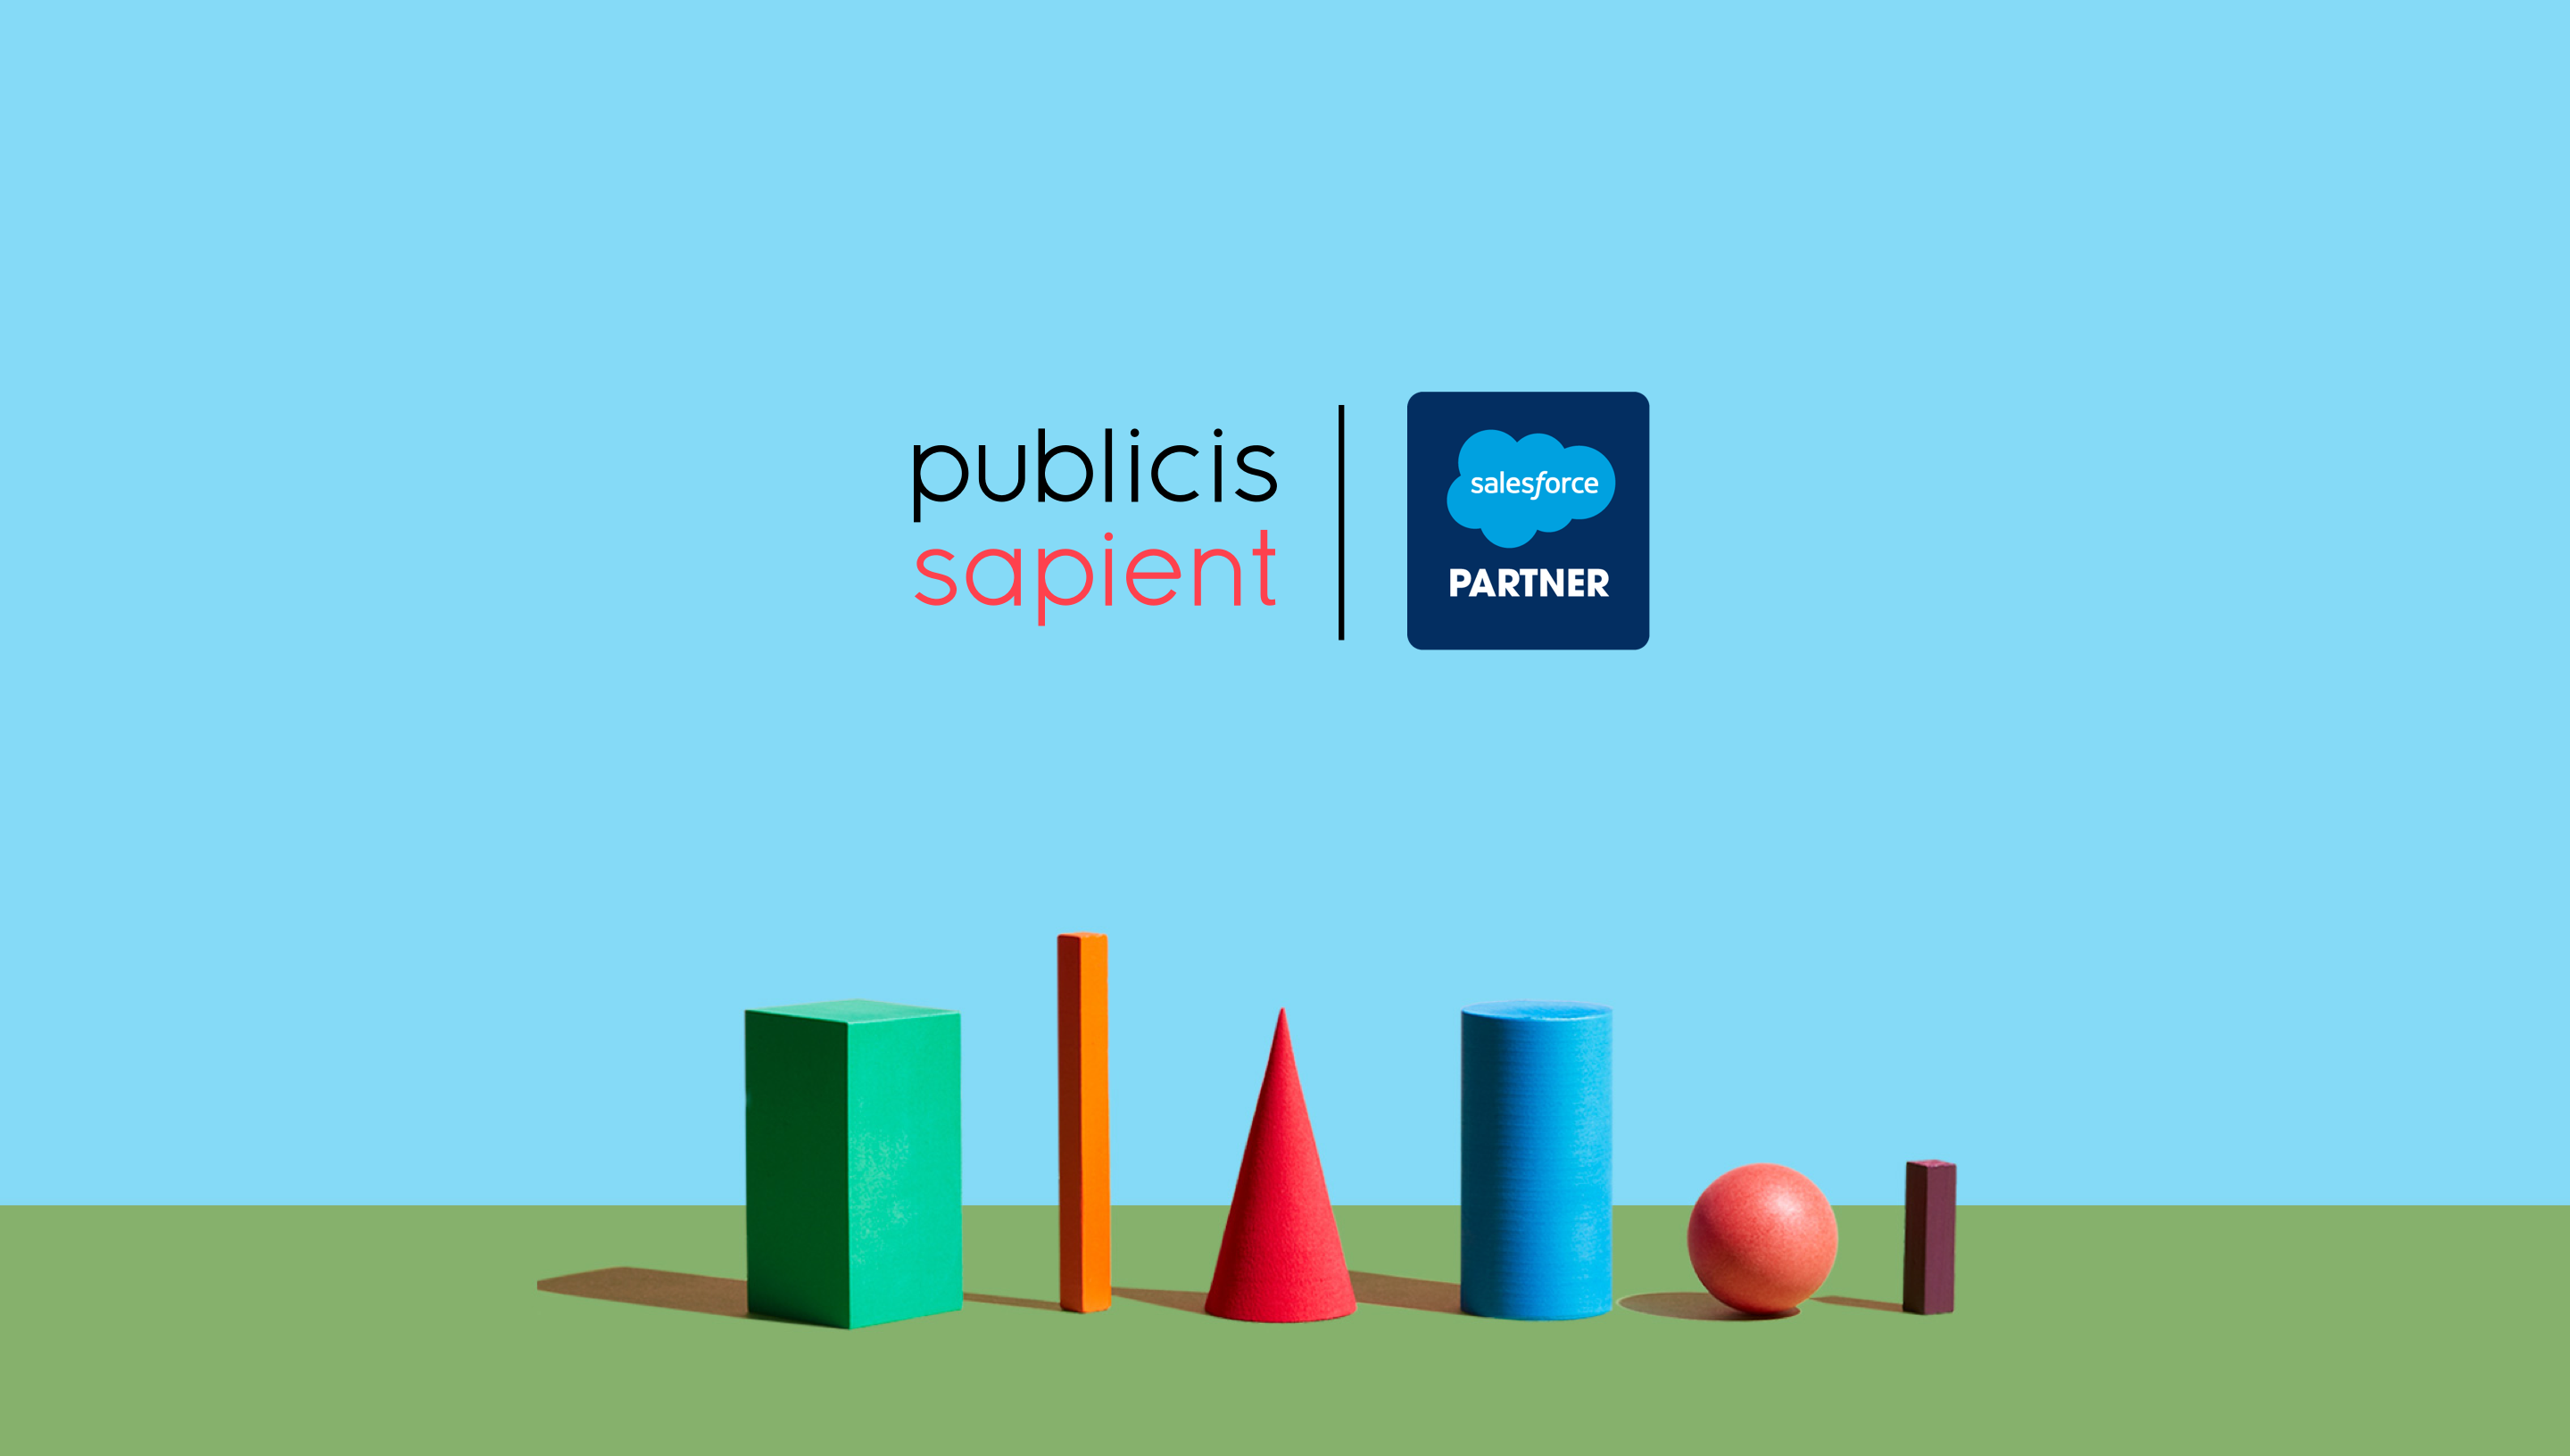 Conceptual landscape of different shapes with PS and Salesforce logos